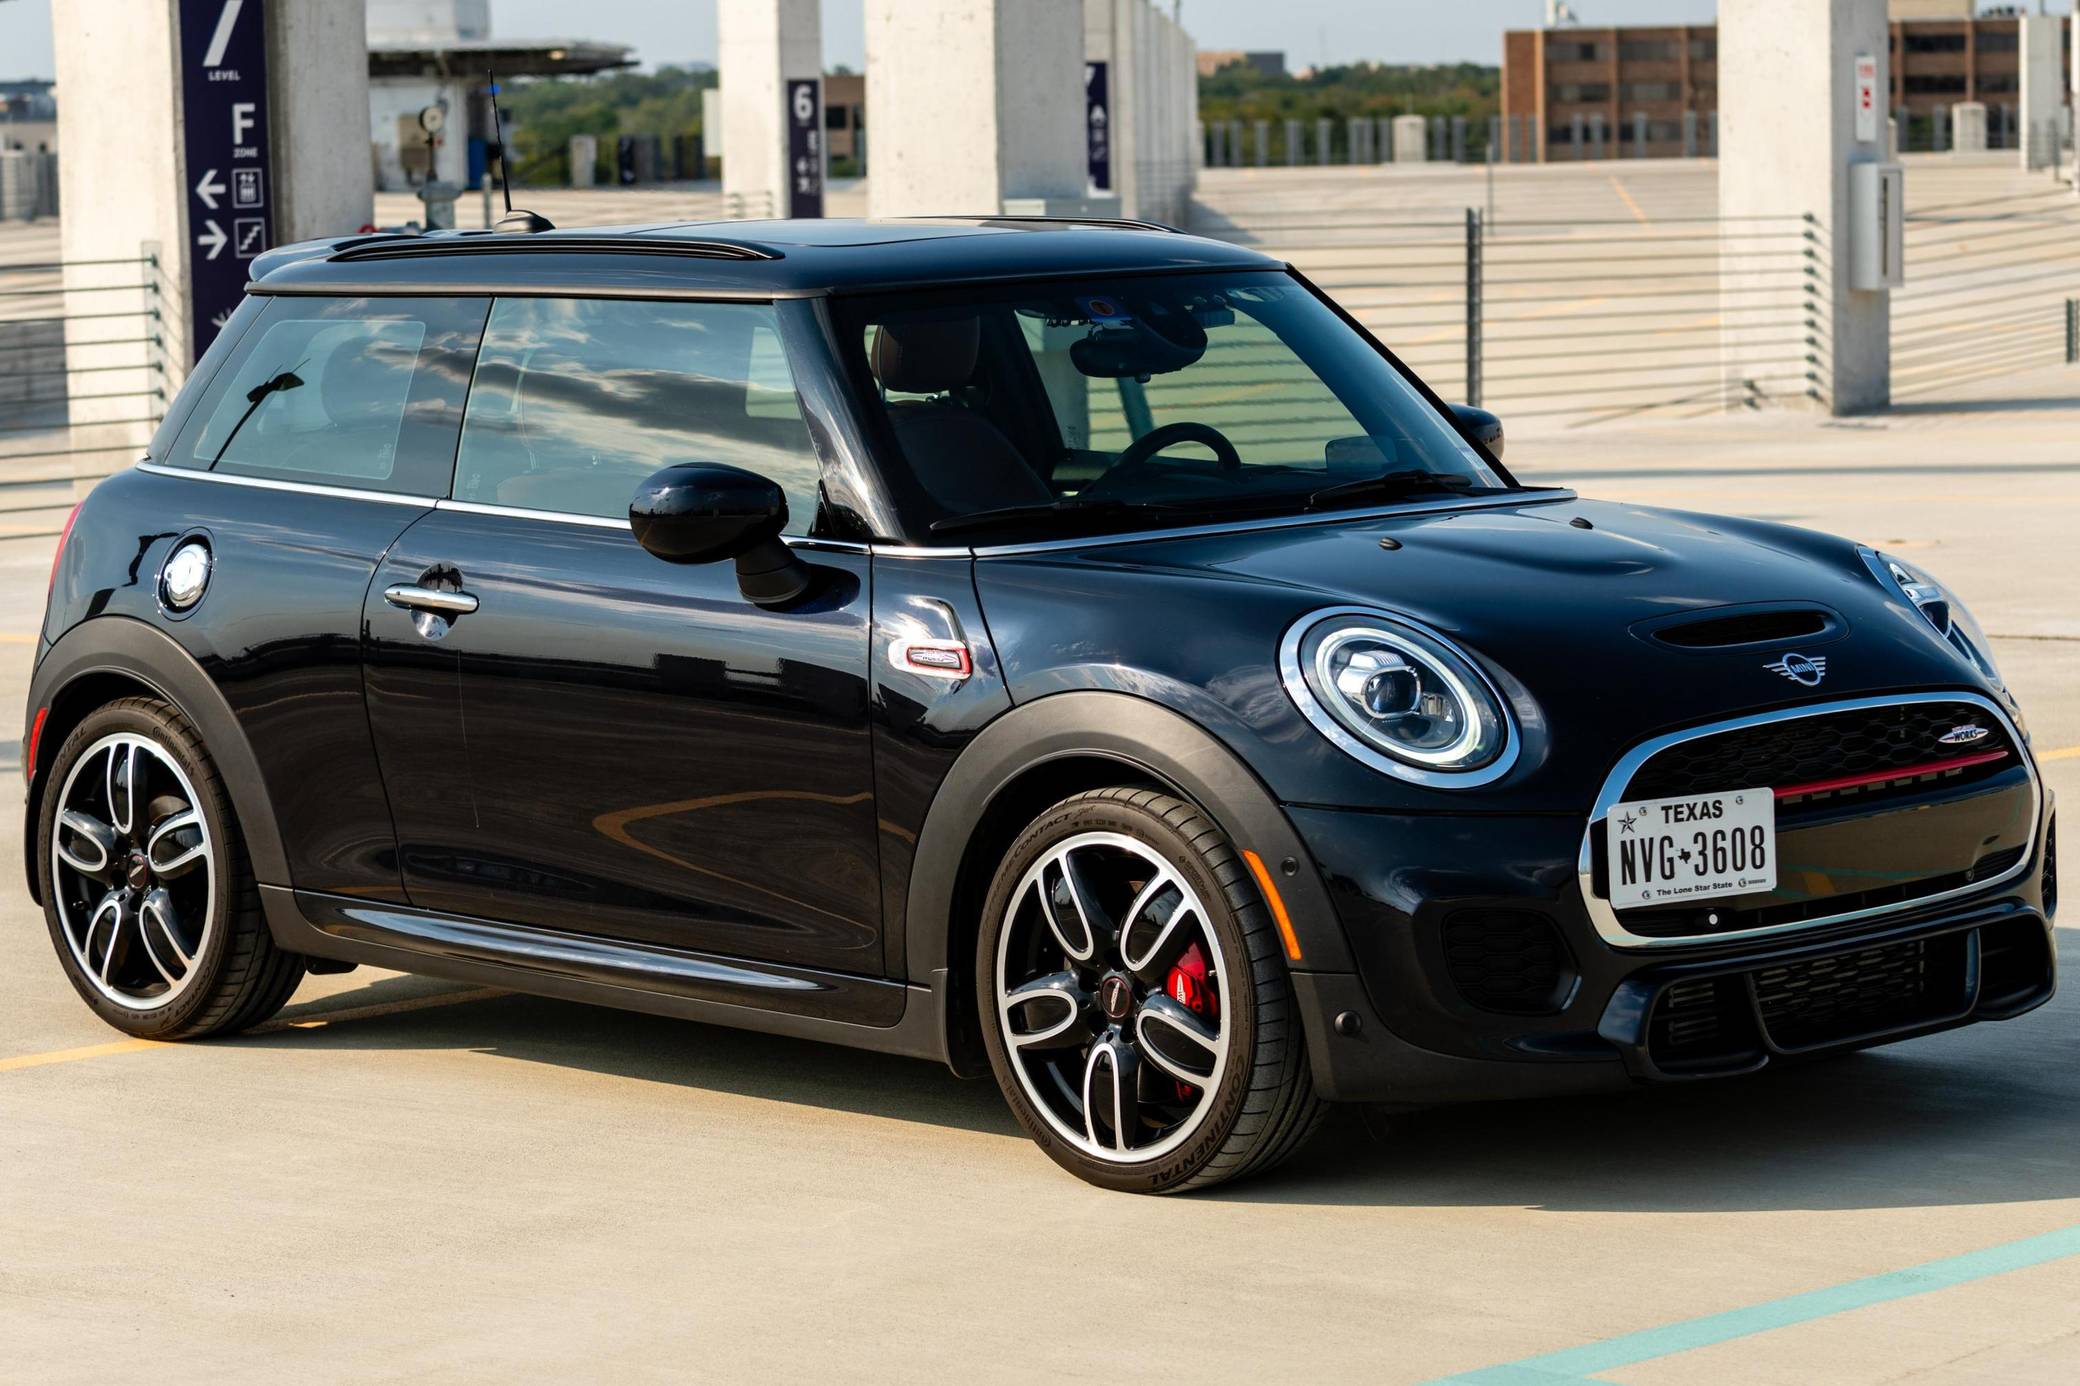 This new Mini John Cooper Works is a manual-only special edition